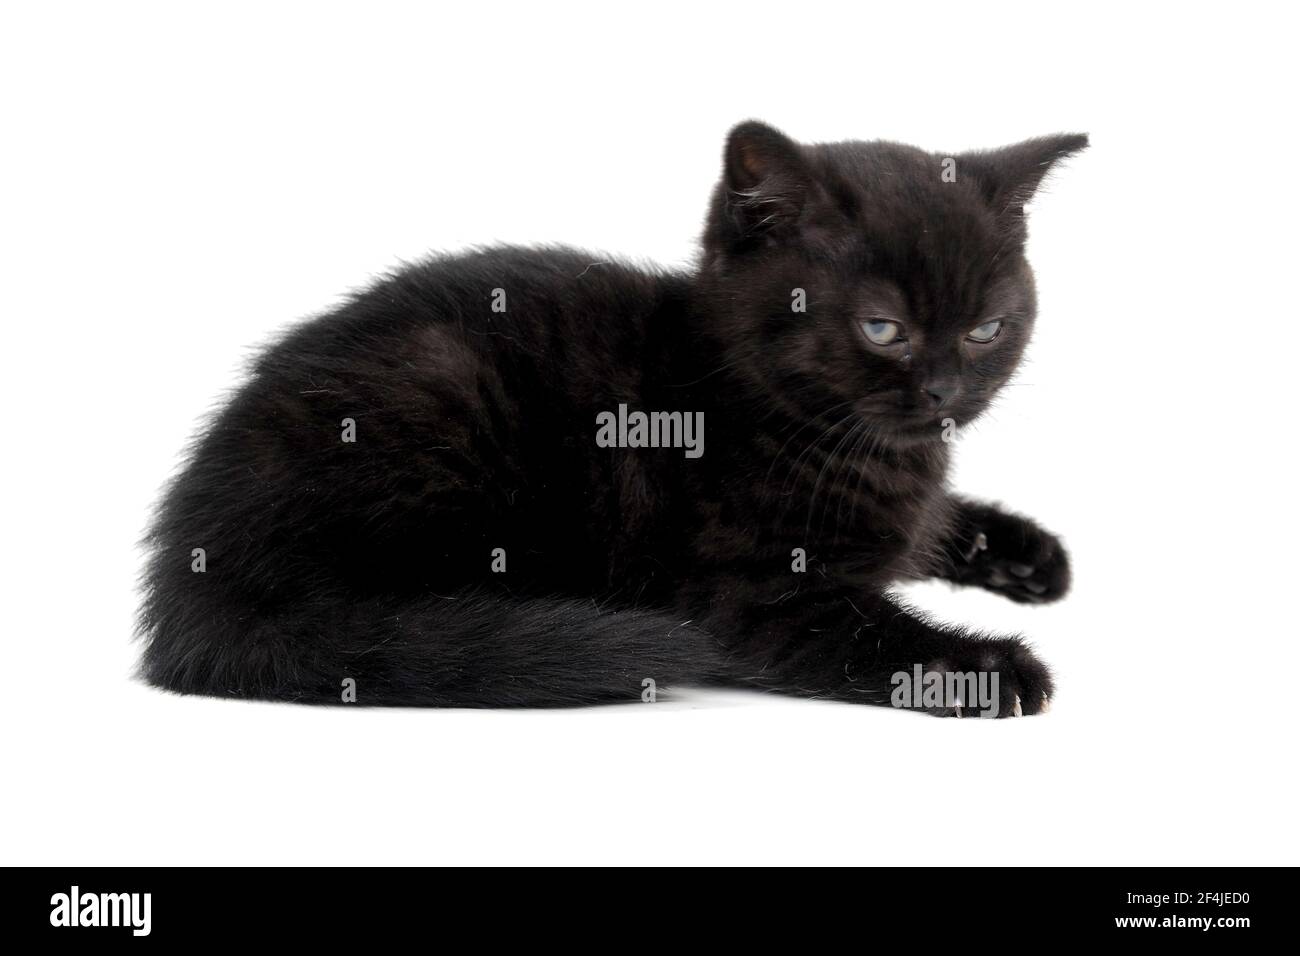 Cute Funny Cat Looking Suspiciously Or Angry On Black Background Stock  Photo - Download Image Now - iStock